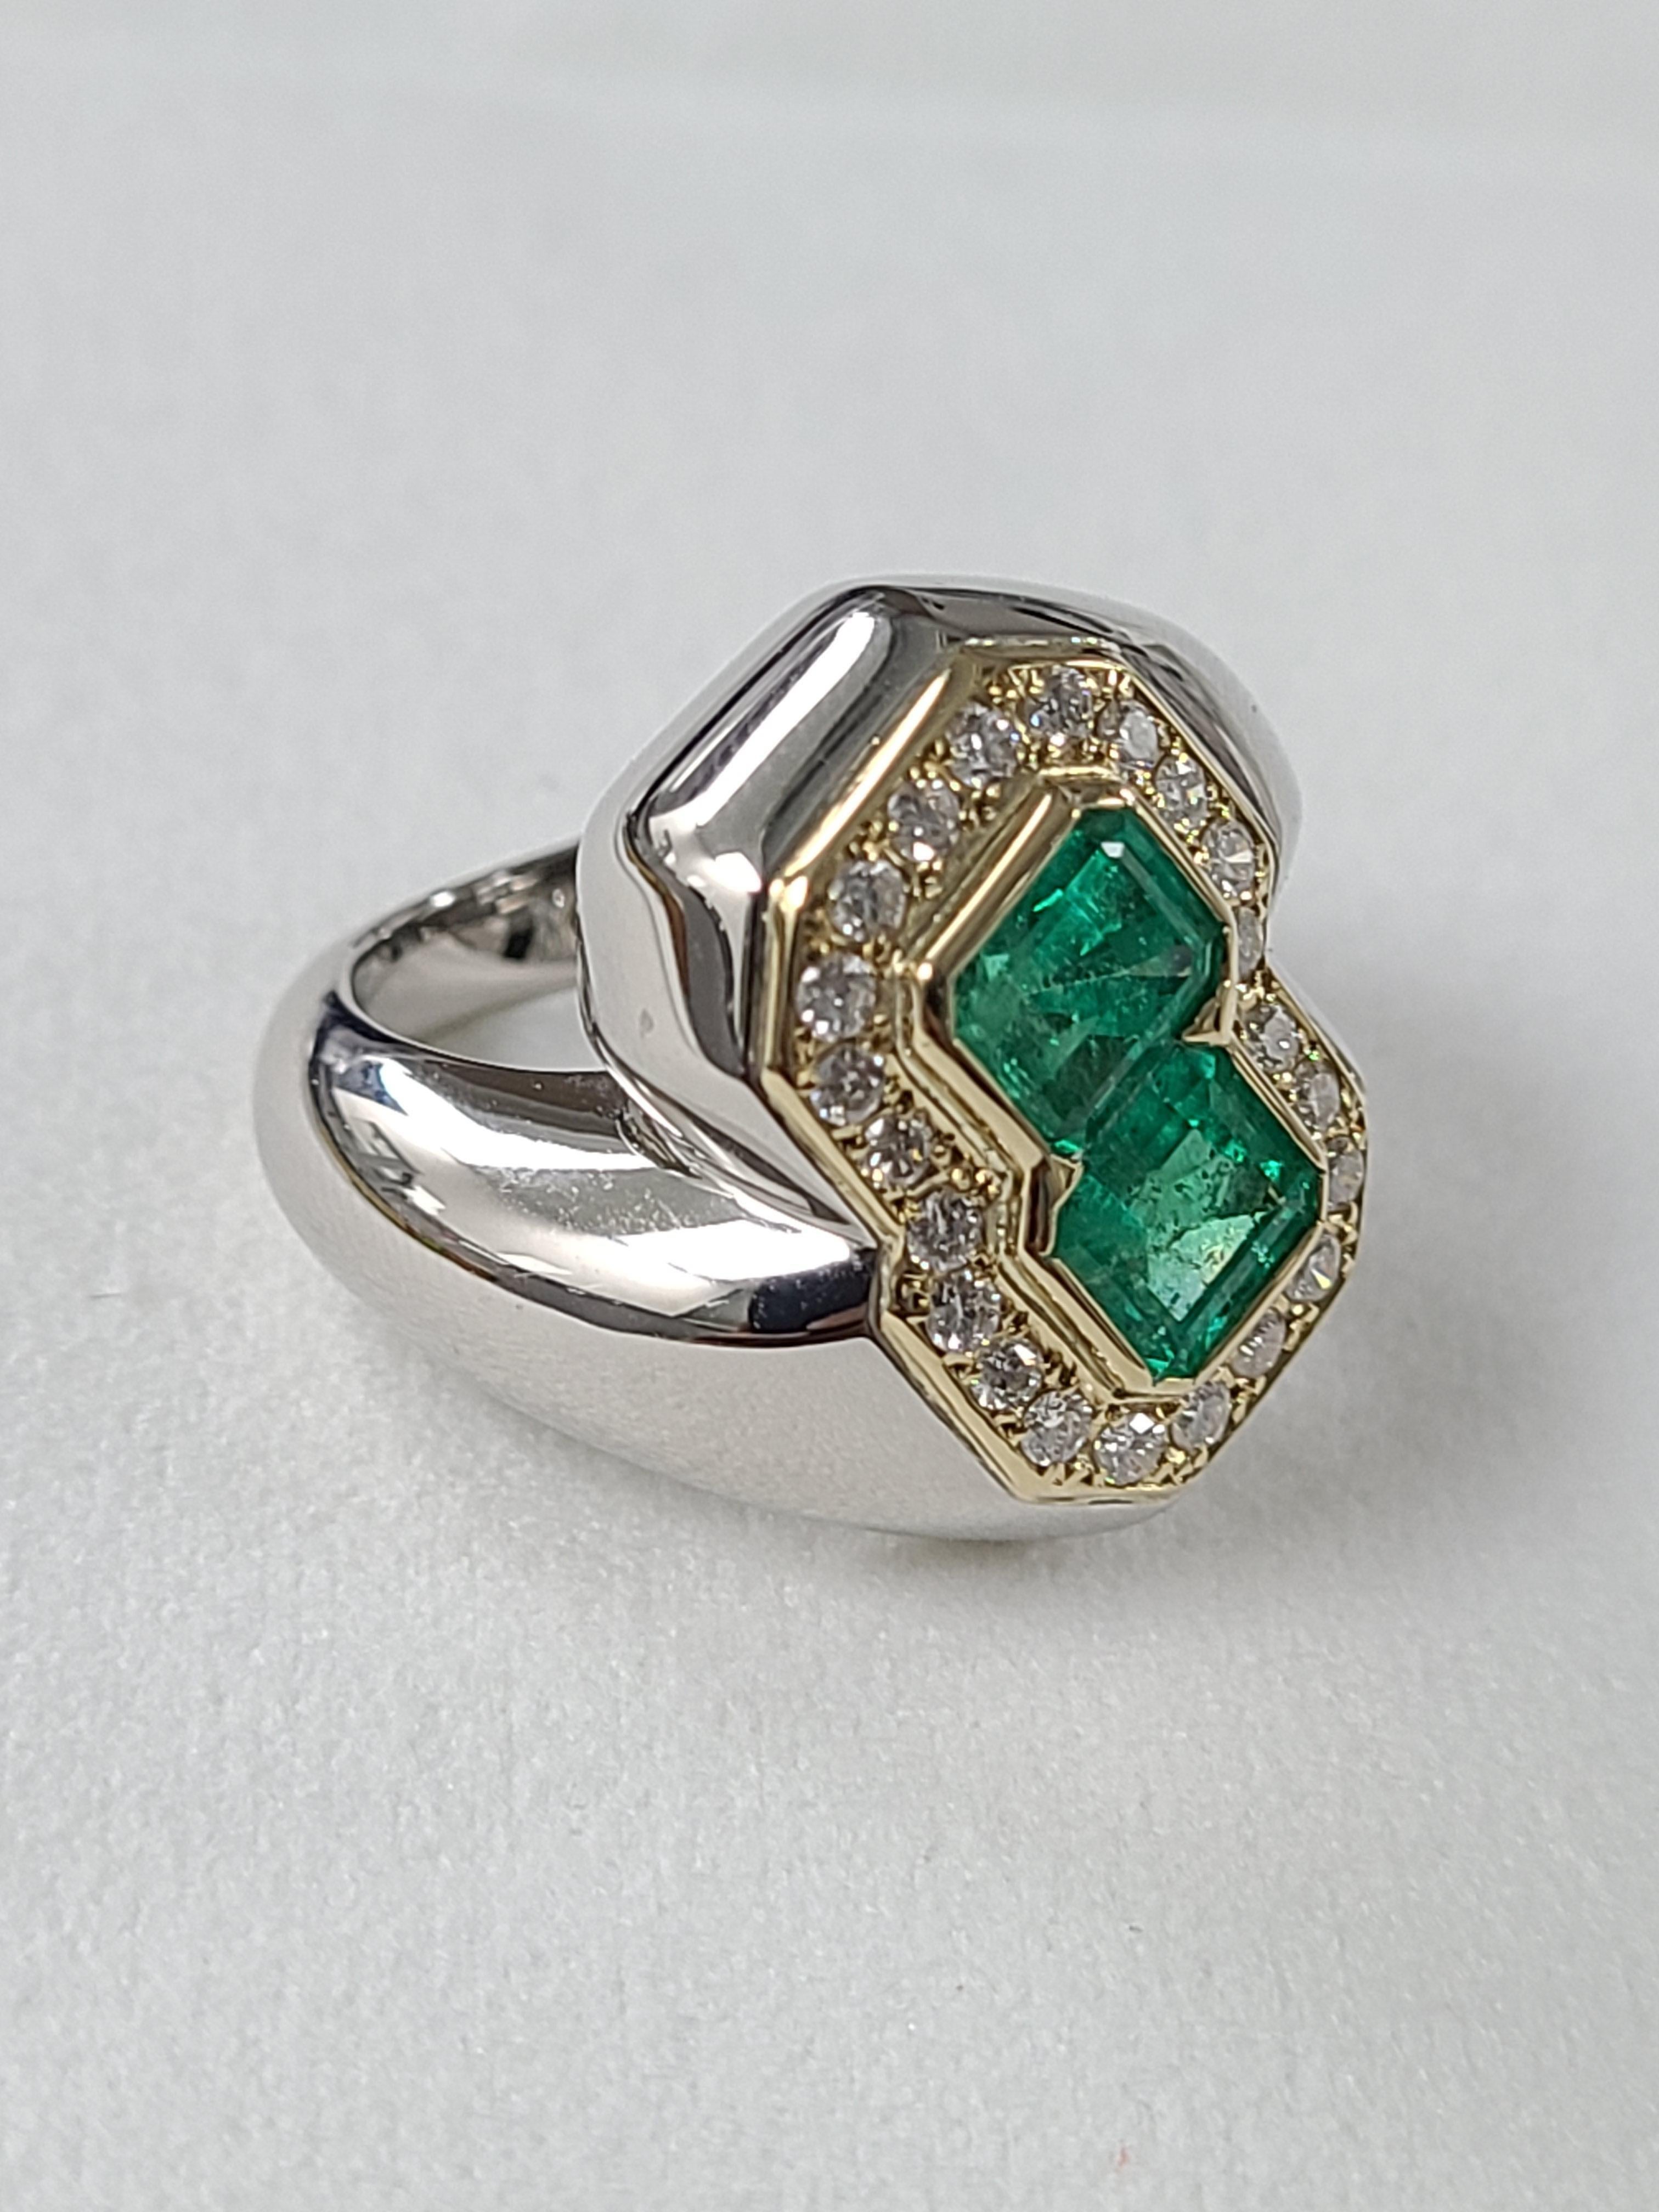 A Gorgeous Estate ring with natural emeralds and diamonds set in a mix of Platinum PT900 and 18K gold . The emerald weight is 1.86 carats and diamond weight is .39 carats . Ring dimensions in cm 1.8 x 1.8 x 2.3 (L X W X H). US size 5 1/2